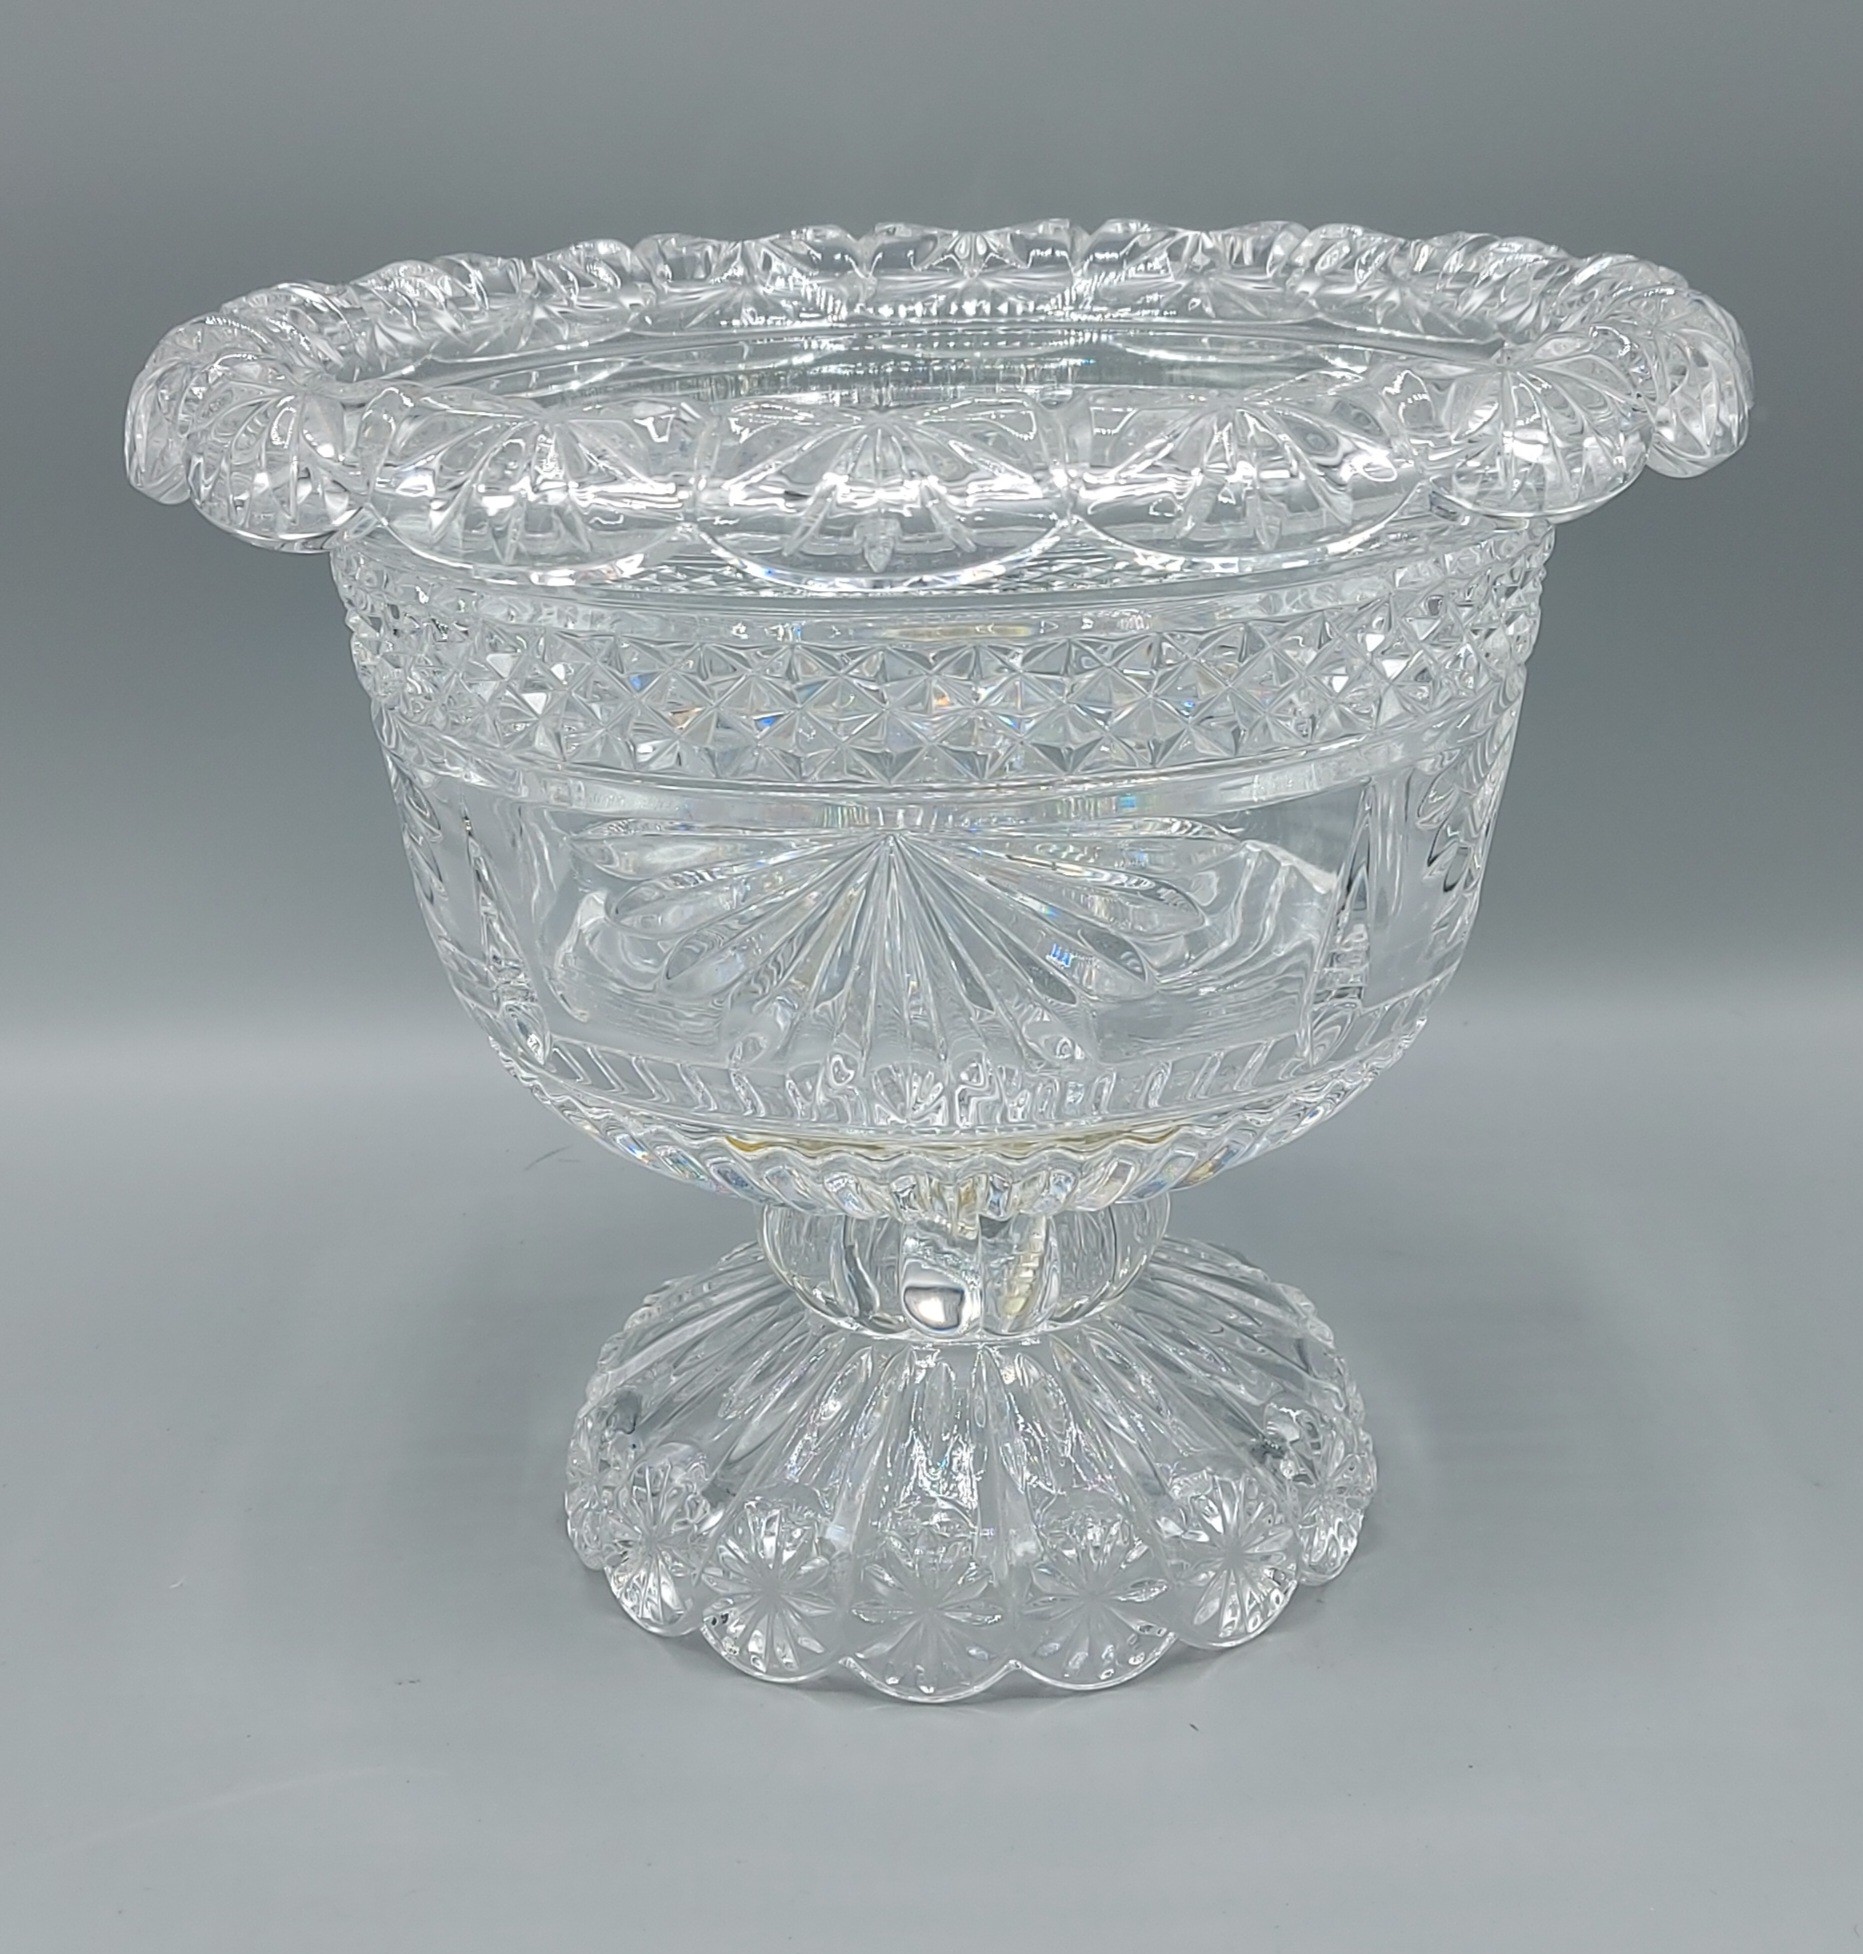 A large cut glass footed bowl, 21cms tall